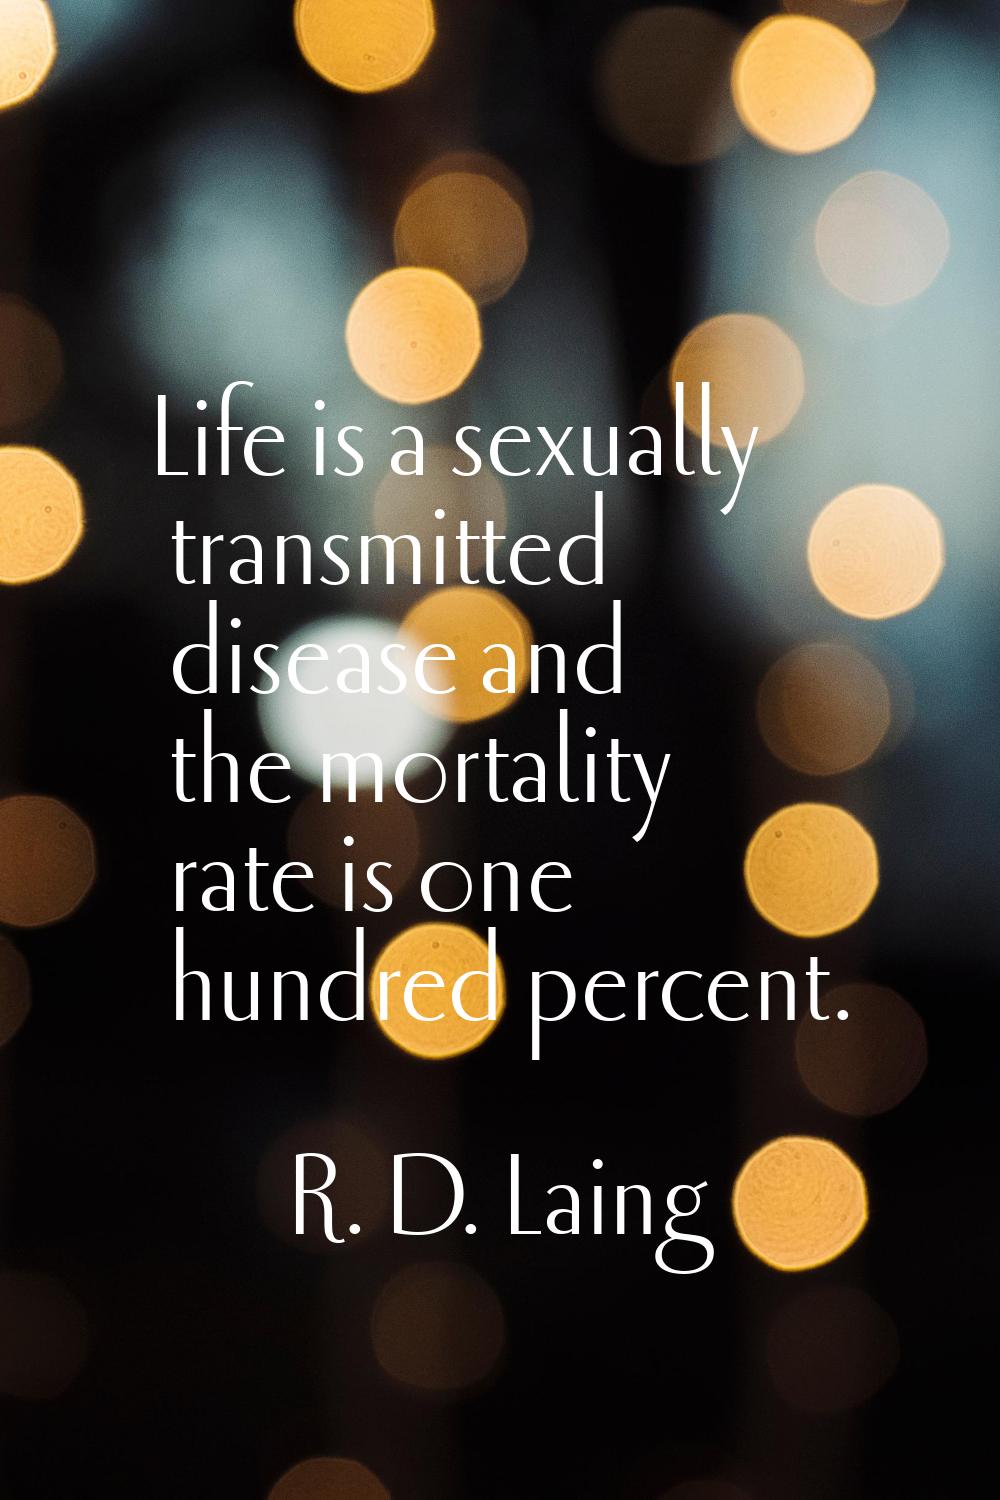 Life is a sexually transmitted disease and the mortality rate is one hundred percent.